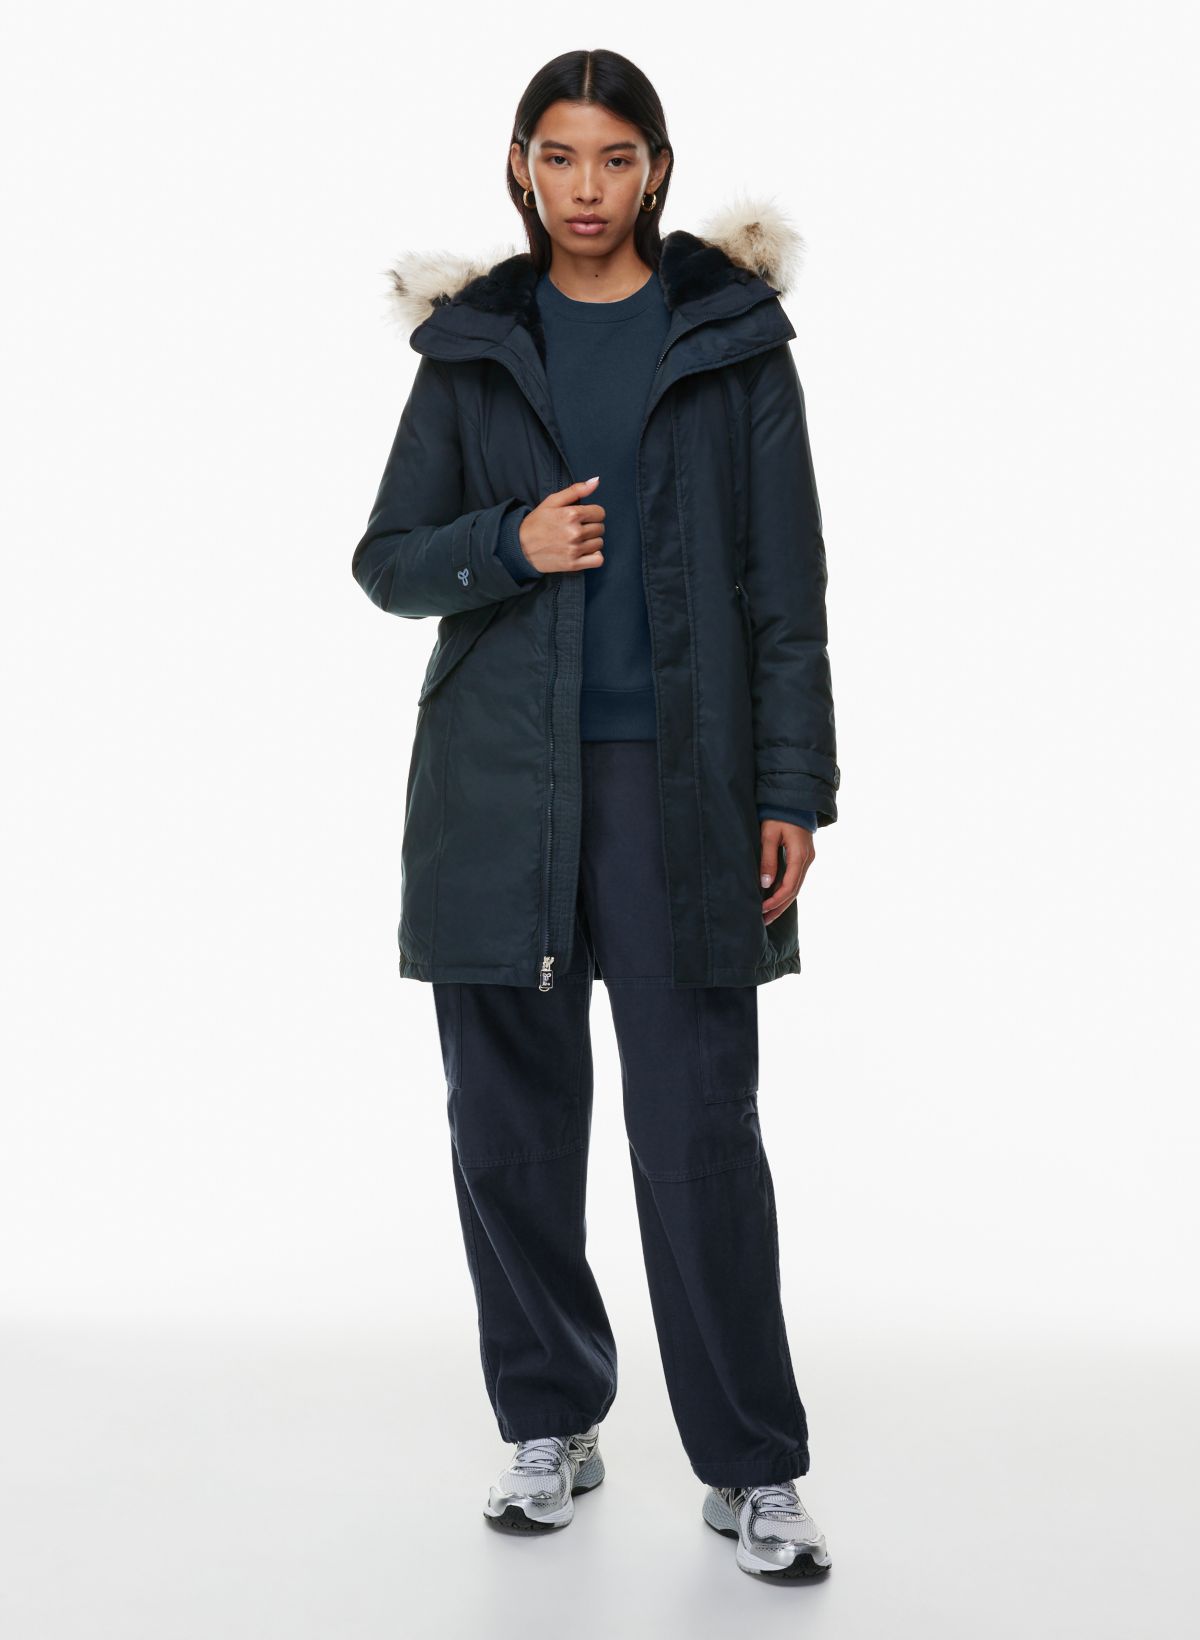 Made for the Arctic, This Coat Is the Warmest on Earth